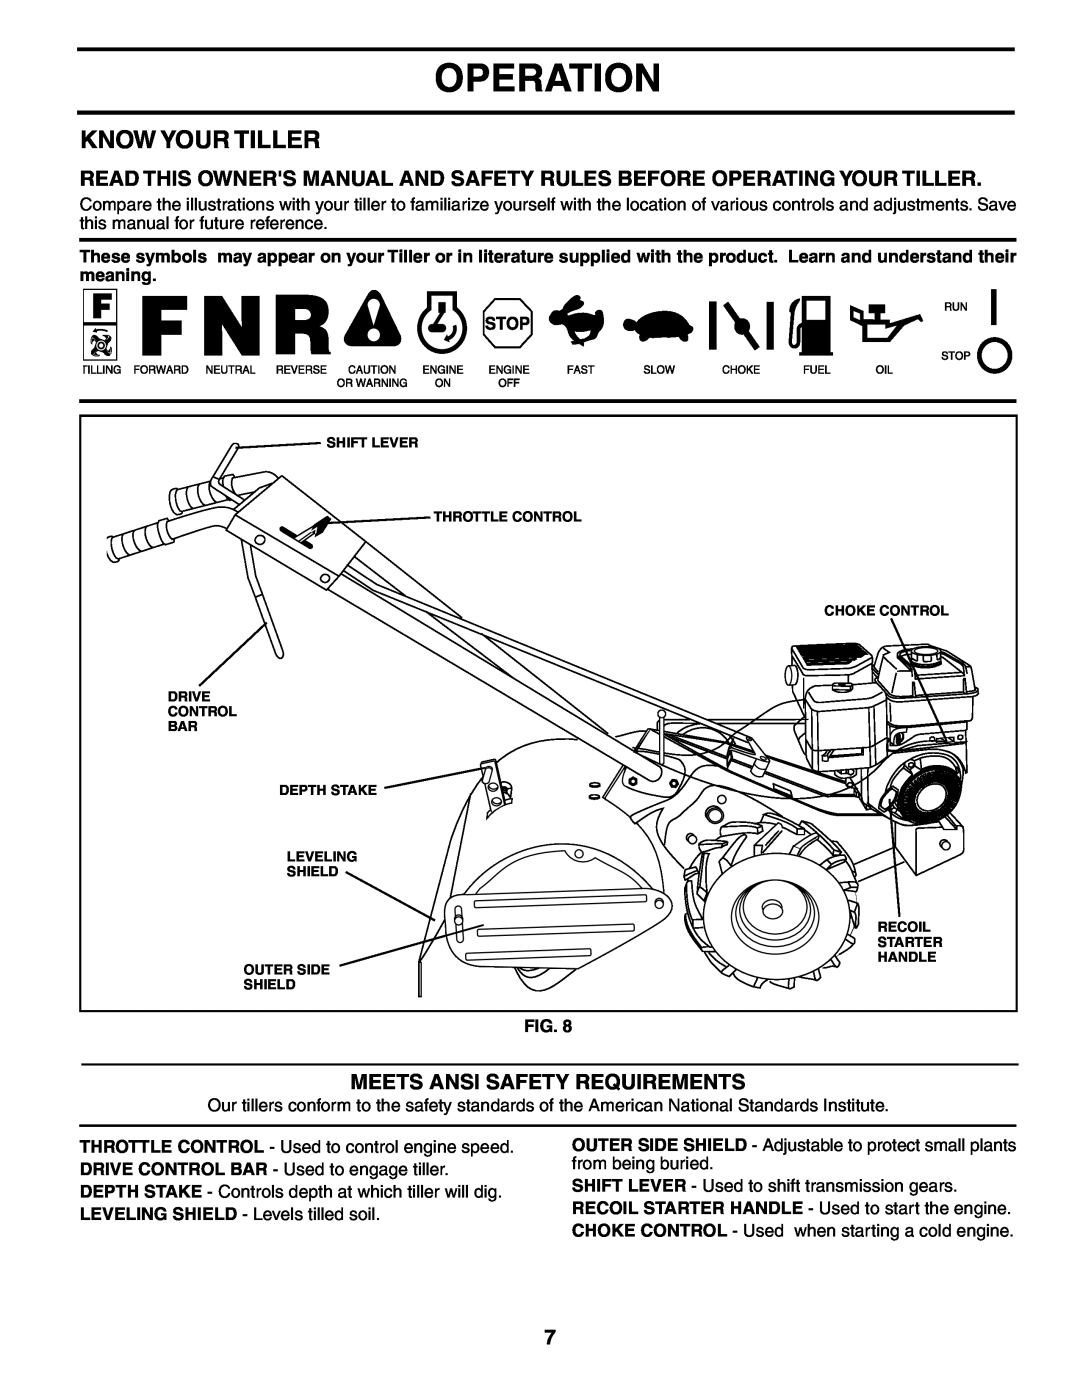 Poulan MRT500 Operation, Know Your Tiller, Read This Owners Manual And Safety Rules Before Operating Your Tiller 